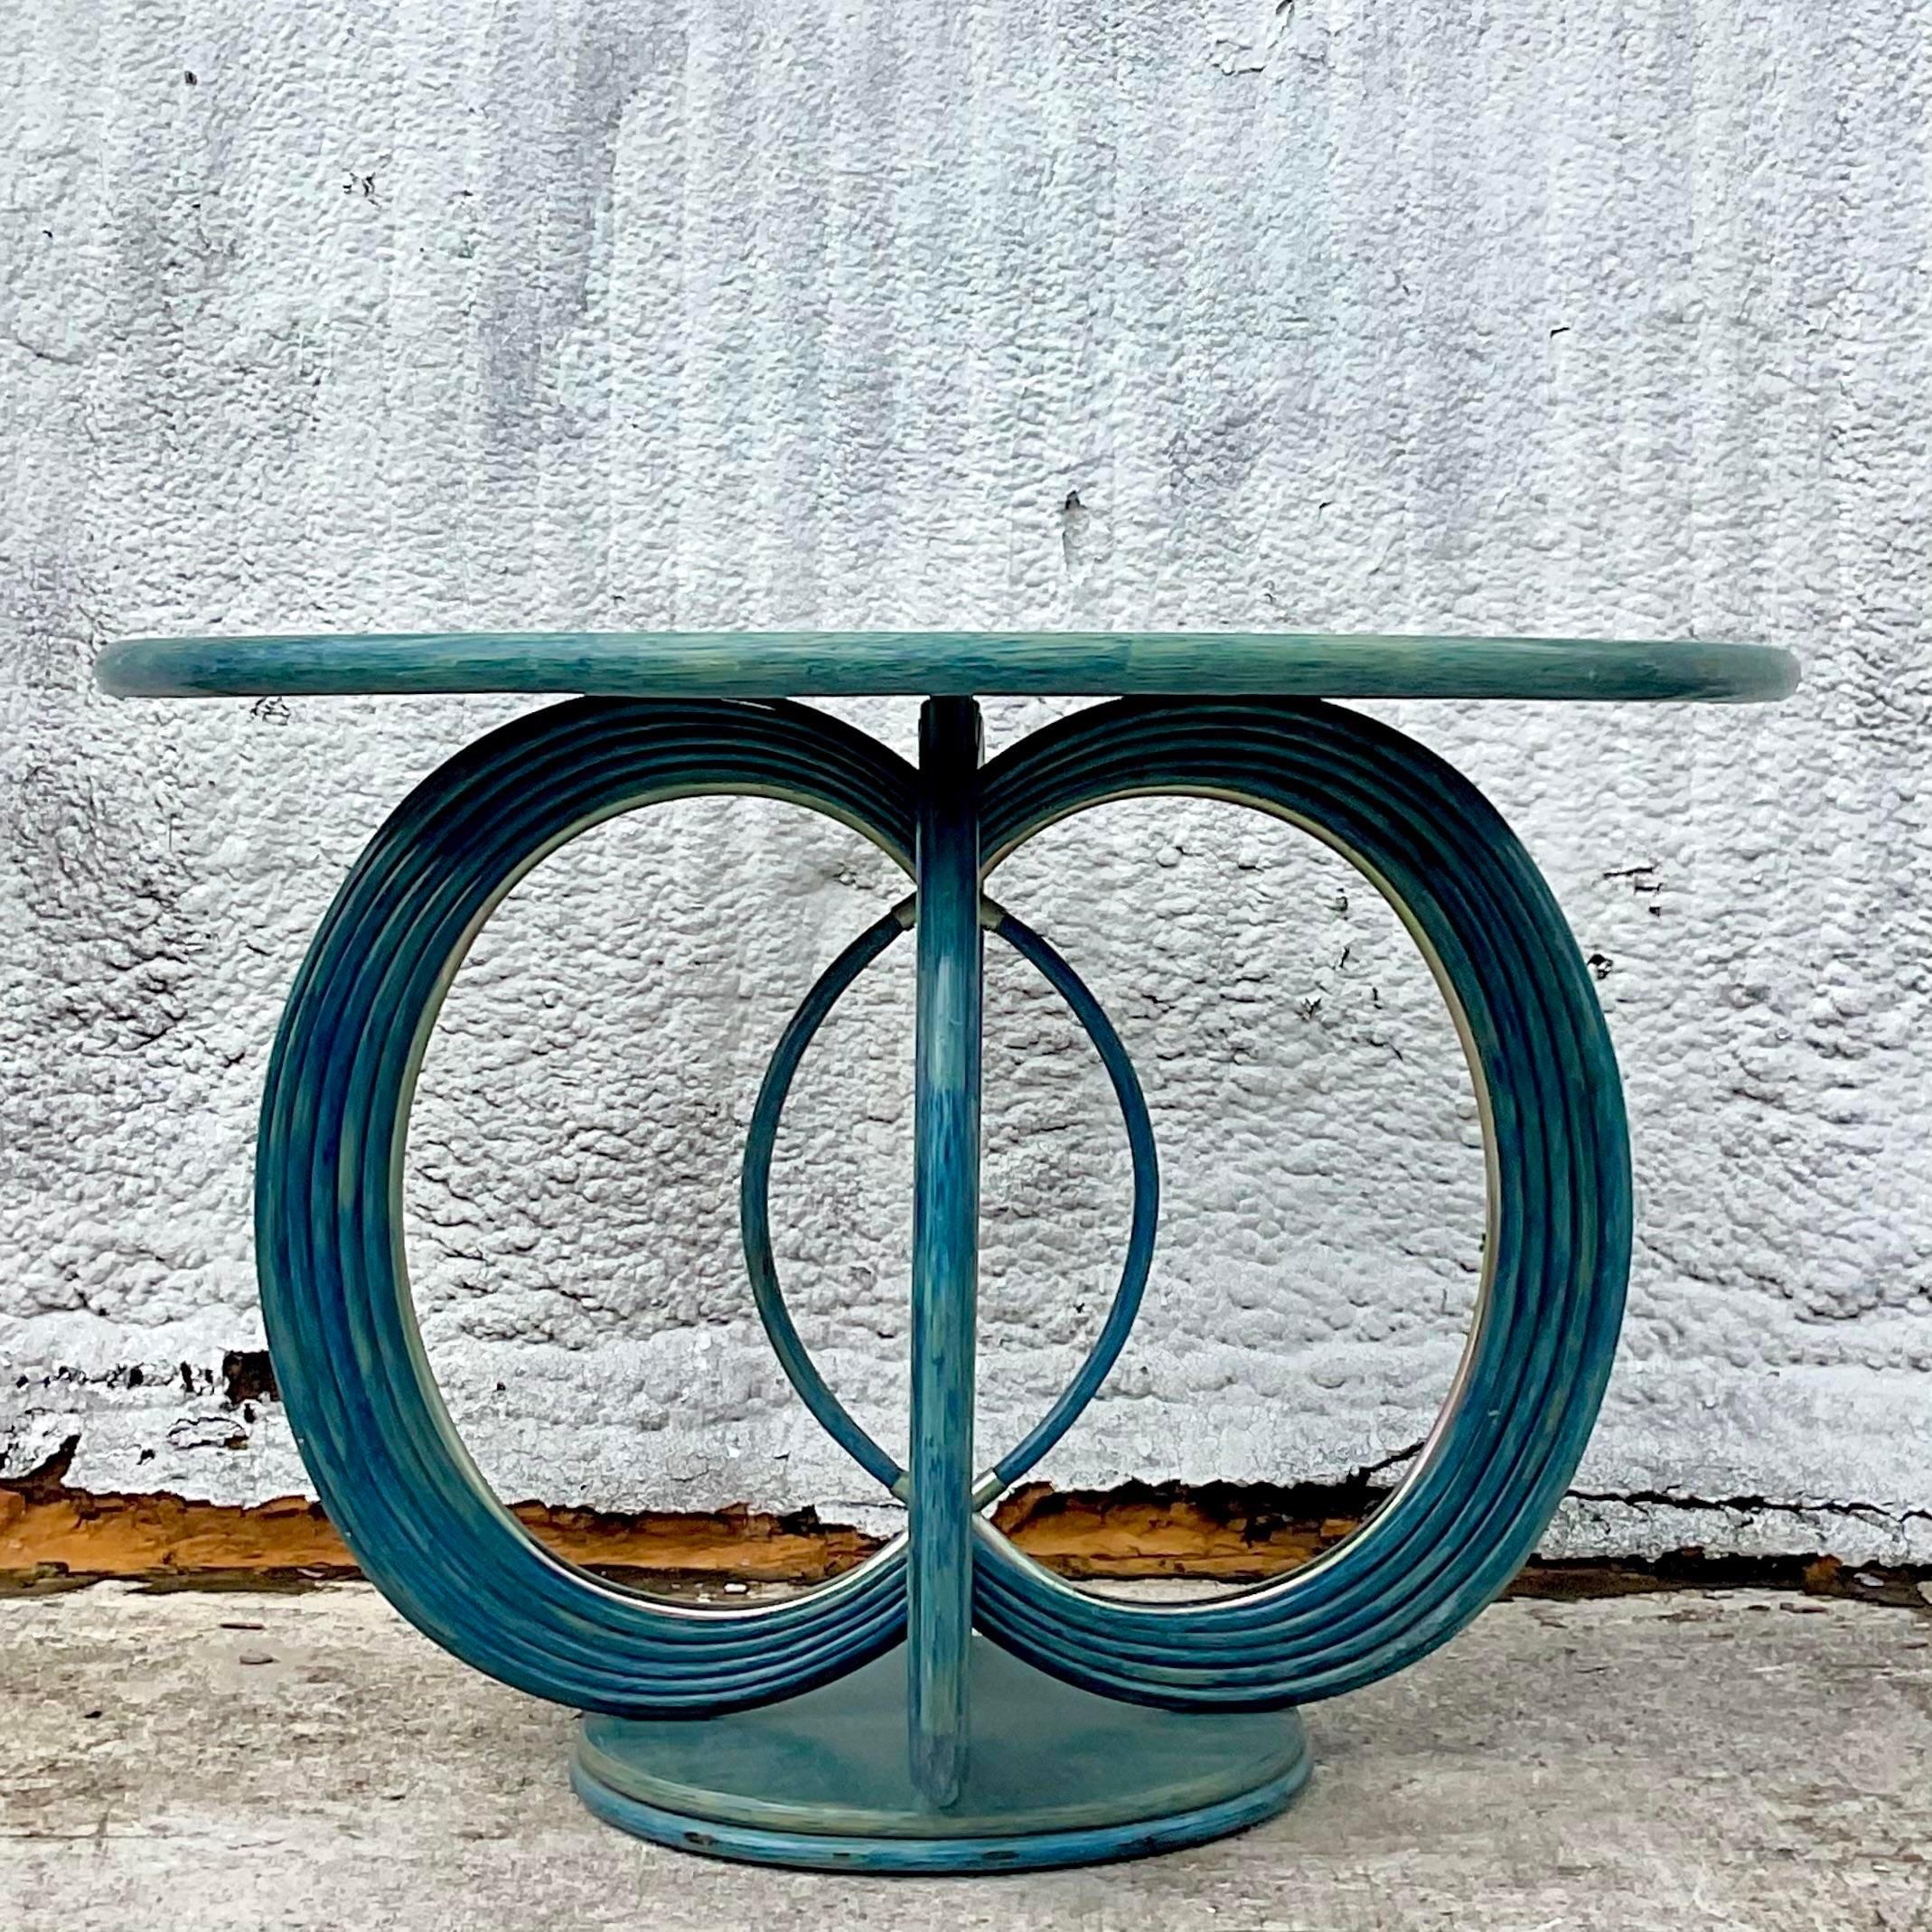 A fantastic vintage Coastal French center hall table. A chic bent rattan in a brilliant turquoise finish. A real show stopper. Acquired from a Palm Beach estate